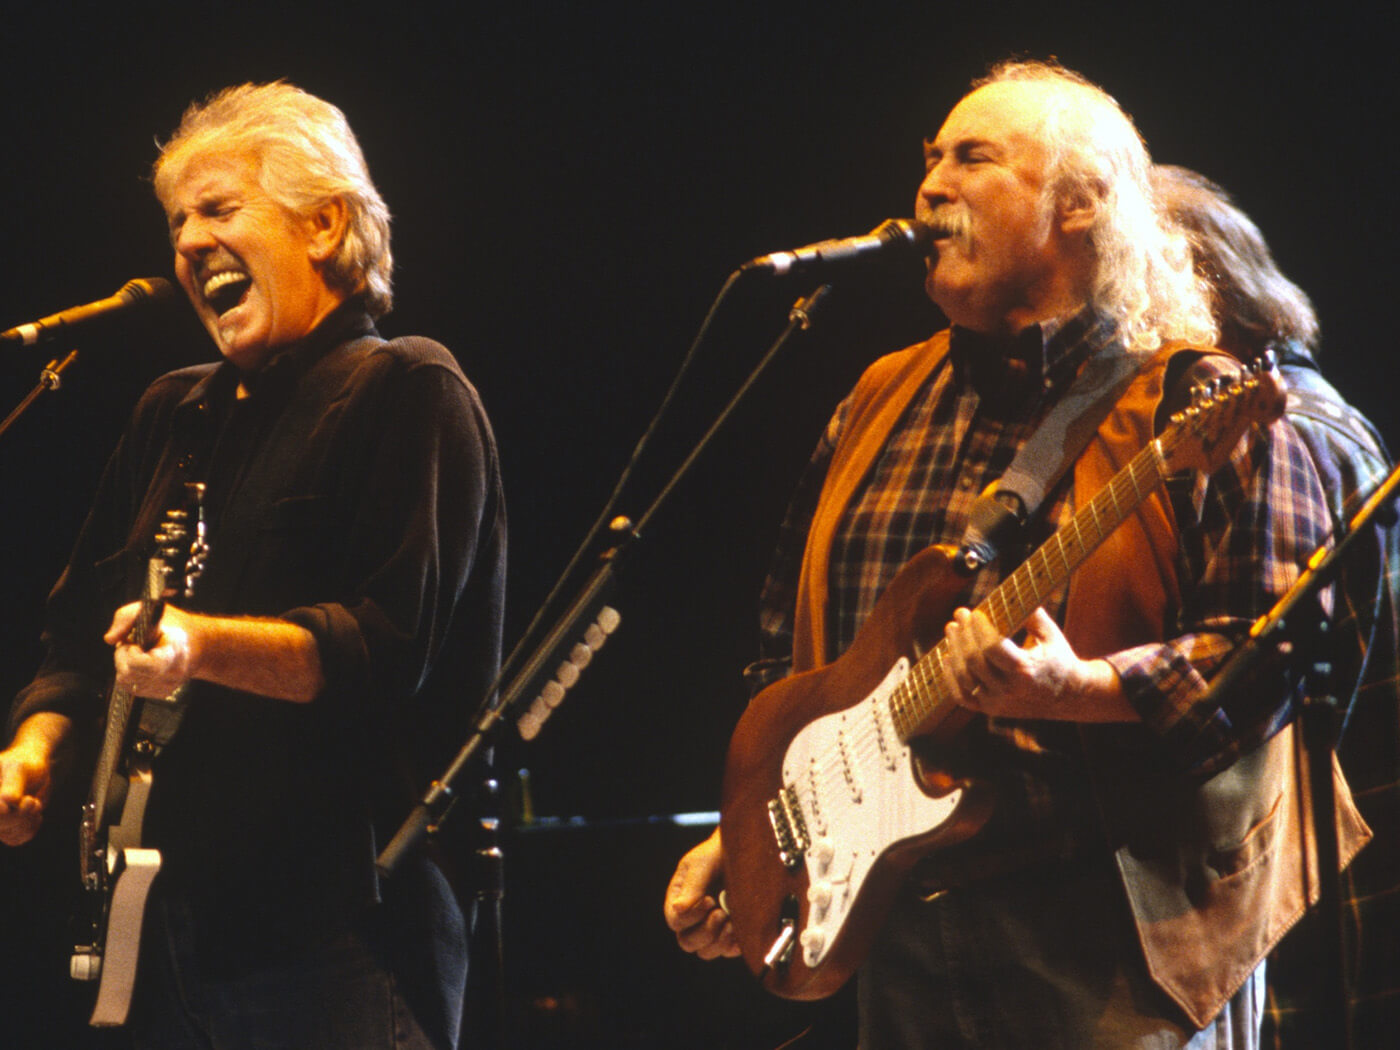 Graham Nash and David Crosby performing together in 2000